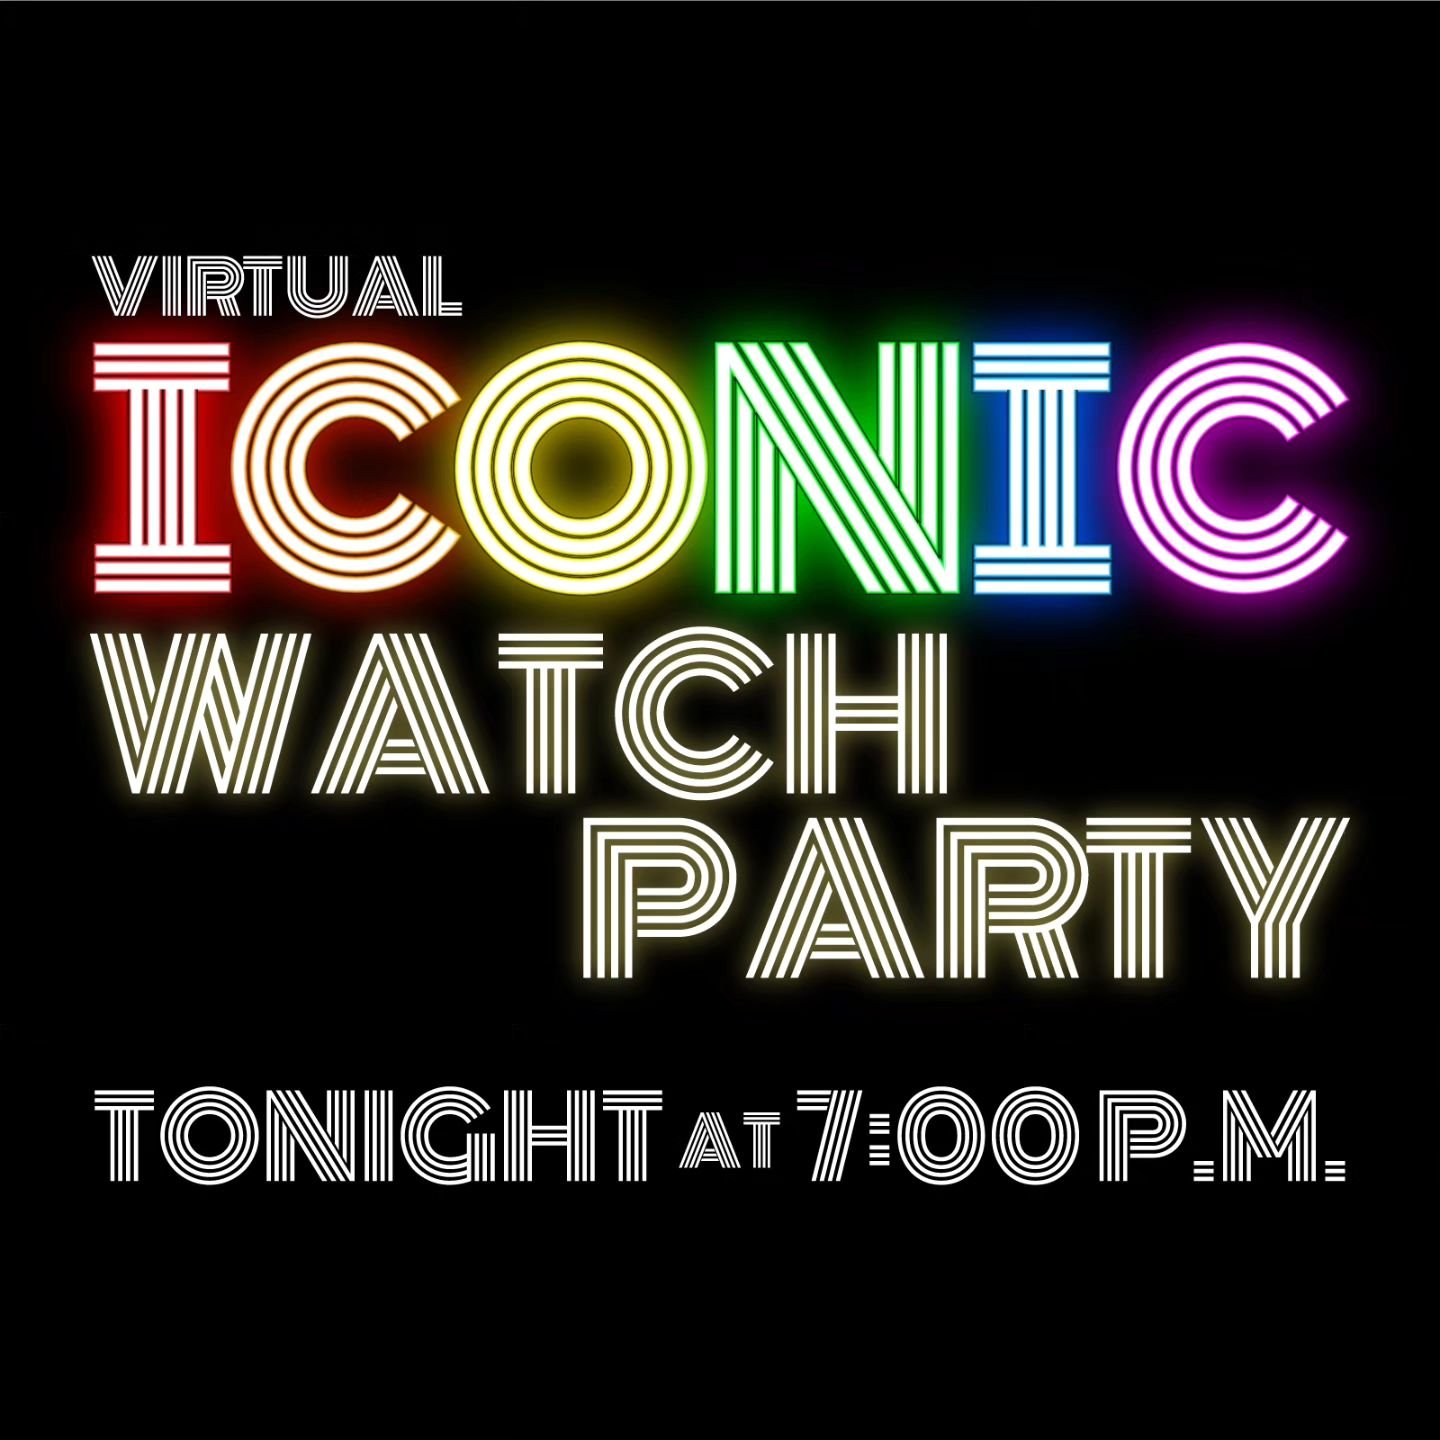 Don't forget to join us for our virtual ICONIC watch party tonight starting at 7:00 p.m. Visit ocgmc.org or check the link in our bio to start watching. We'll see you there. 

#menalive #watchparty #concert #singing #diva #icons #virtual